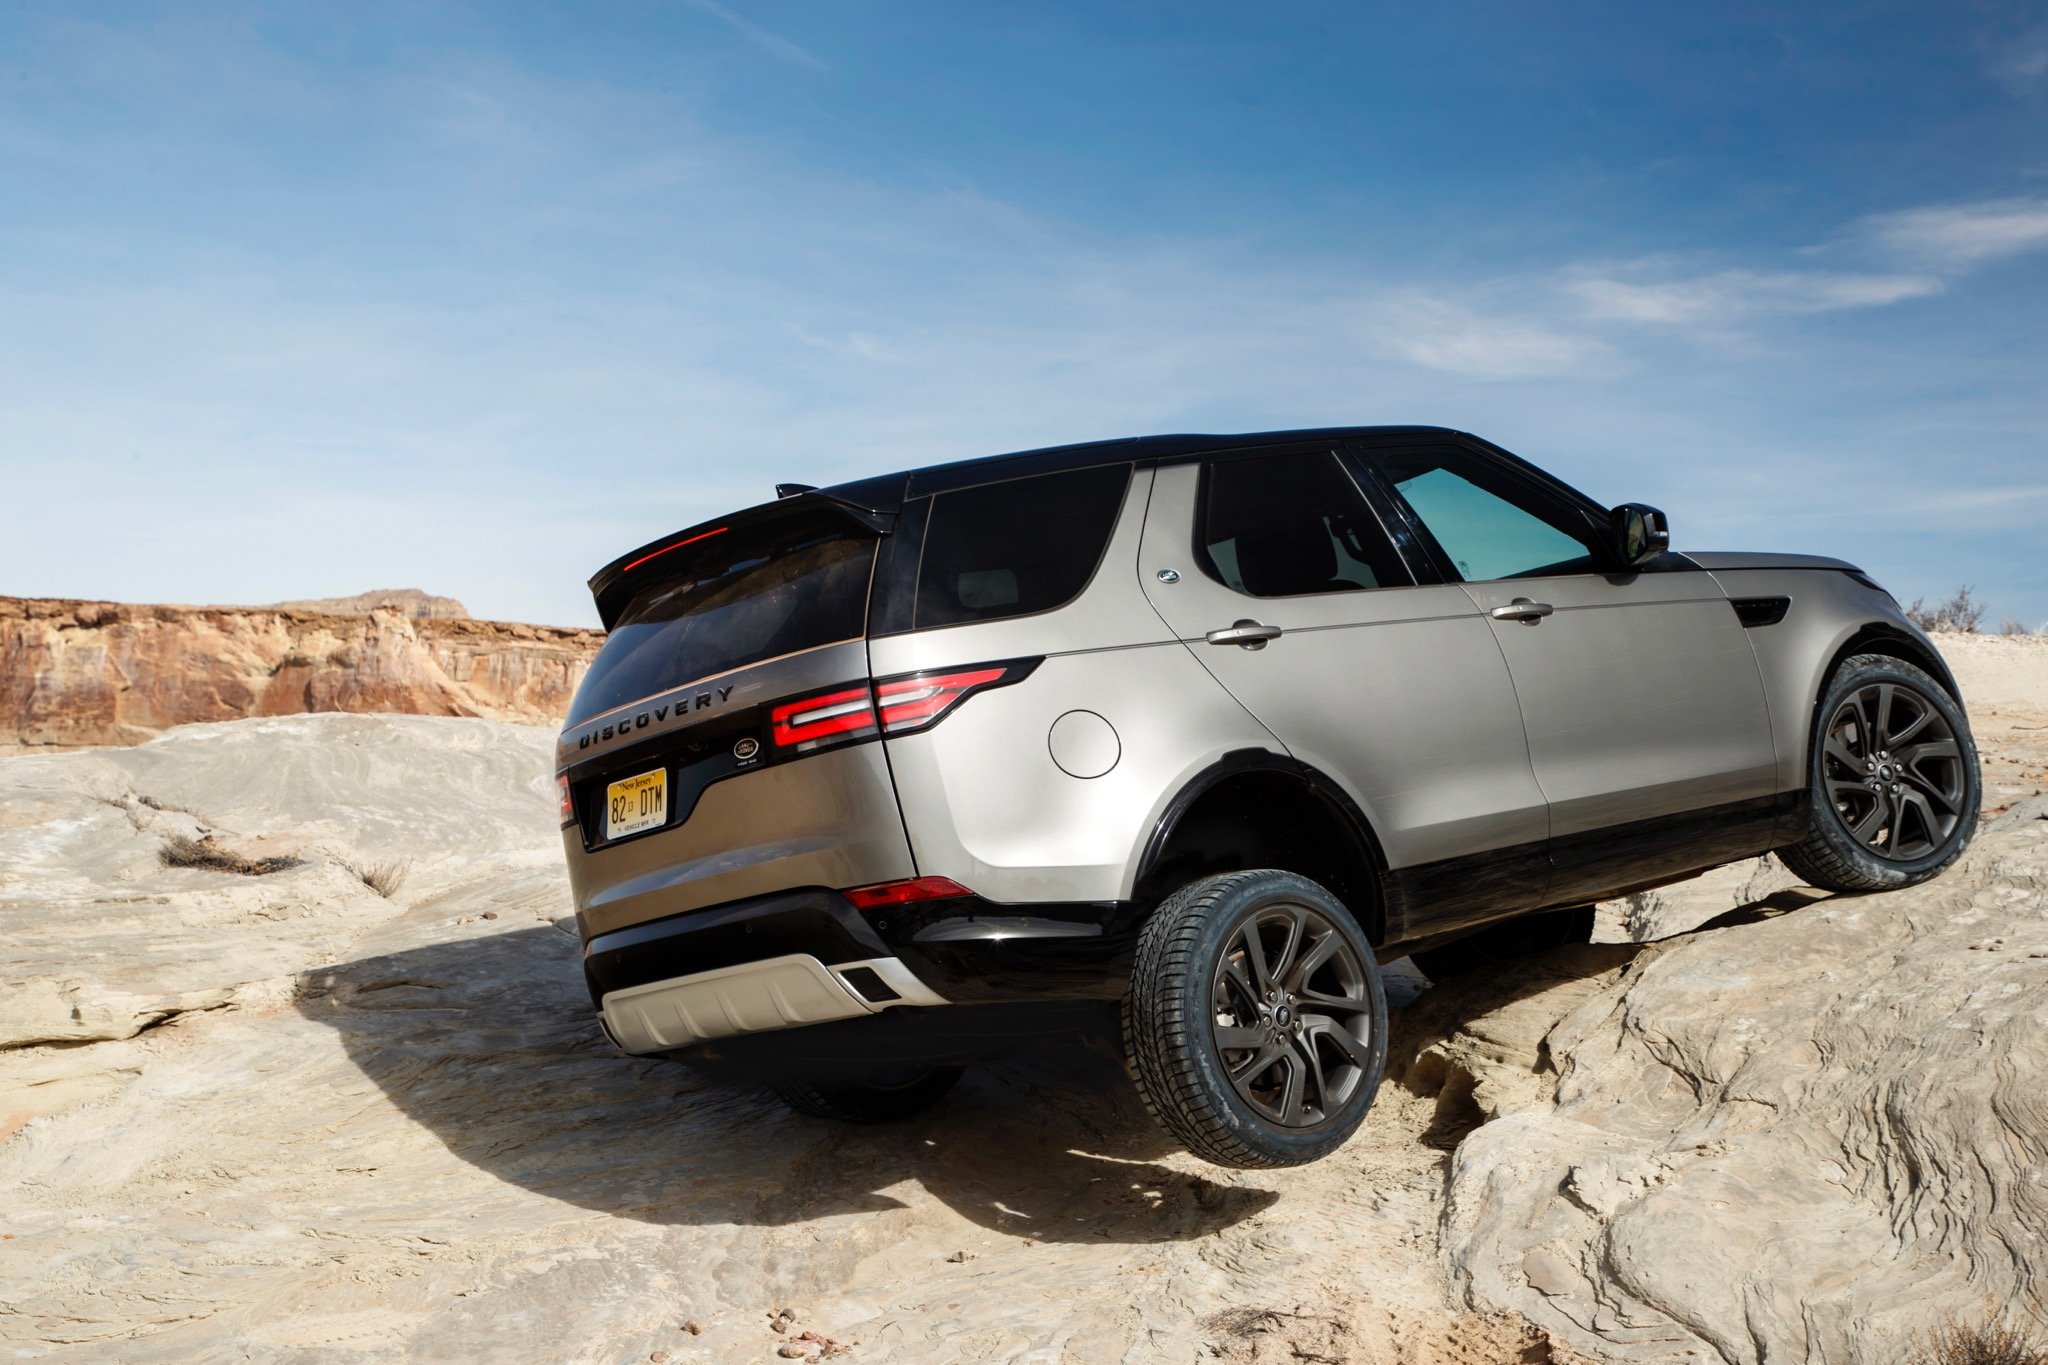 2017 Land Rover Discovery review CarAdvice